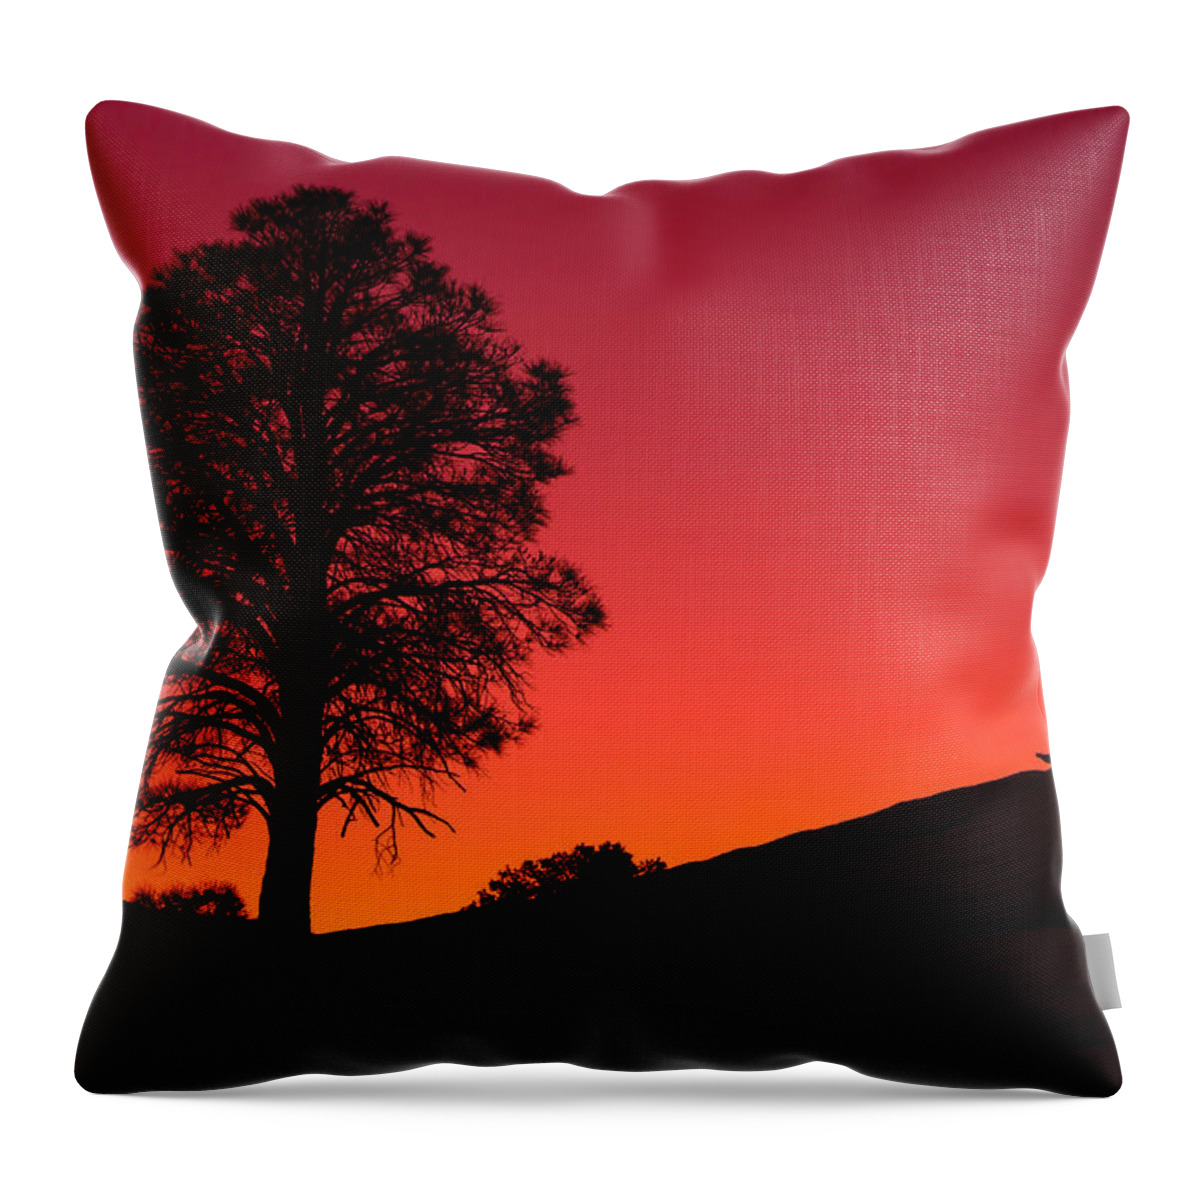 Vermilion Cliffs Throw Pillow featuring the photograph Reminiscing by Chad Dutson